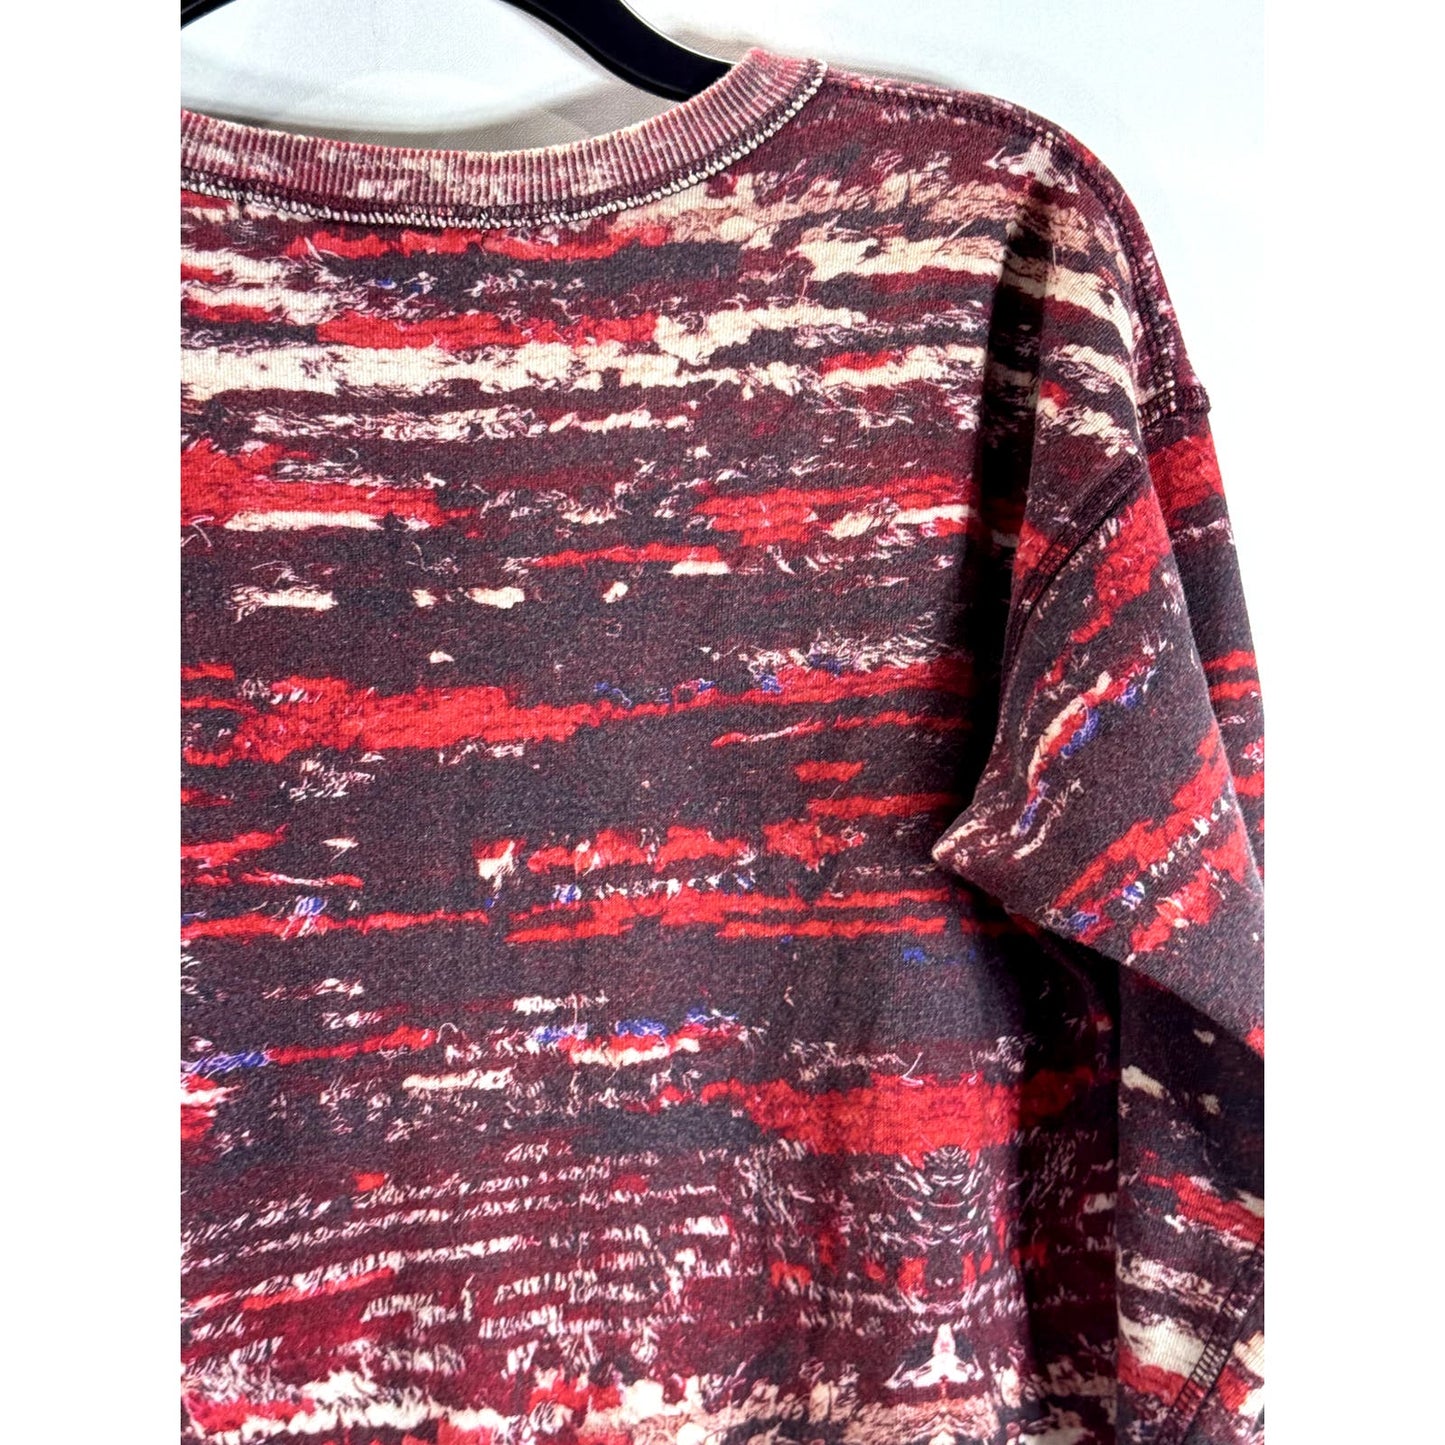 ISABEL MARANT FOR H&M Women's Red Printed Crewneck Pullover Sweater SZ 4